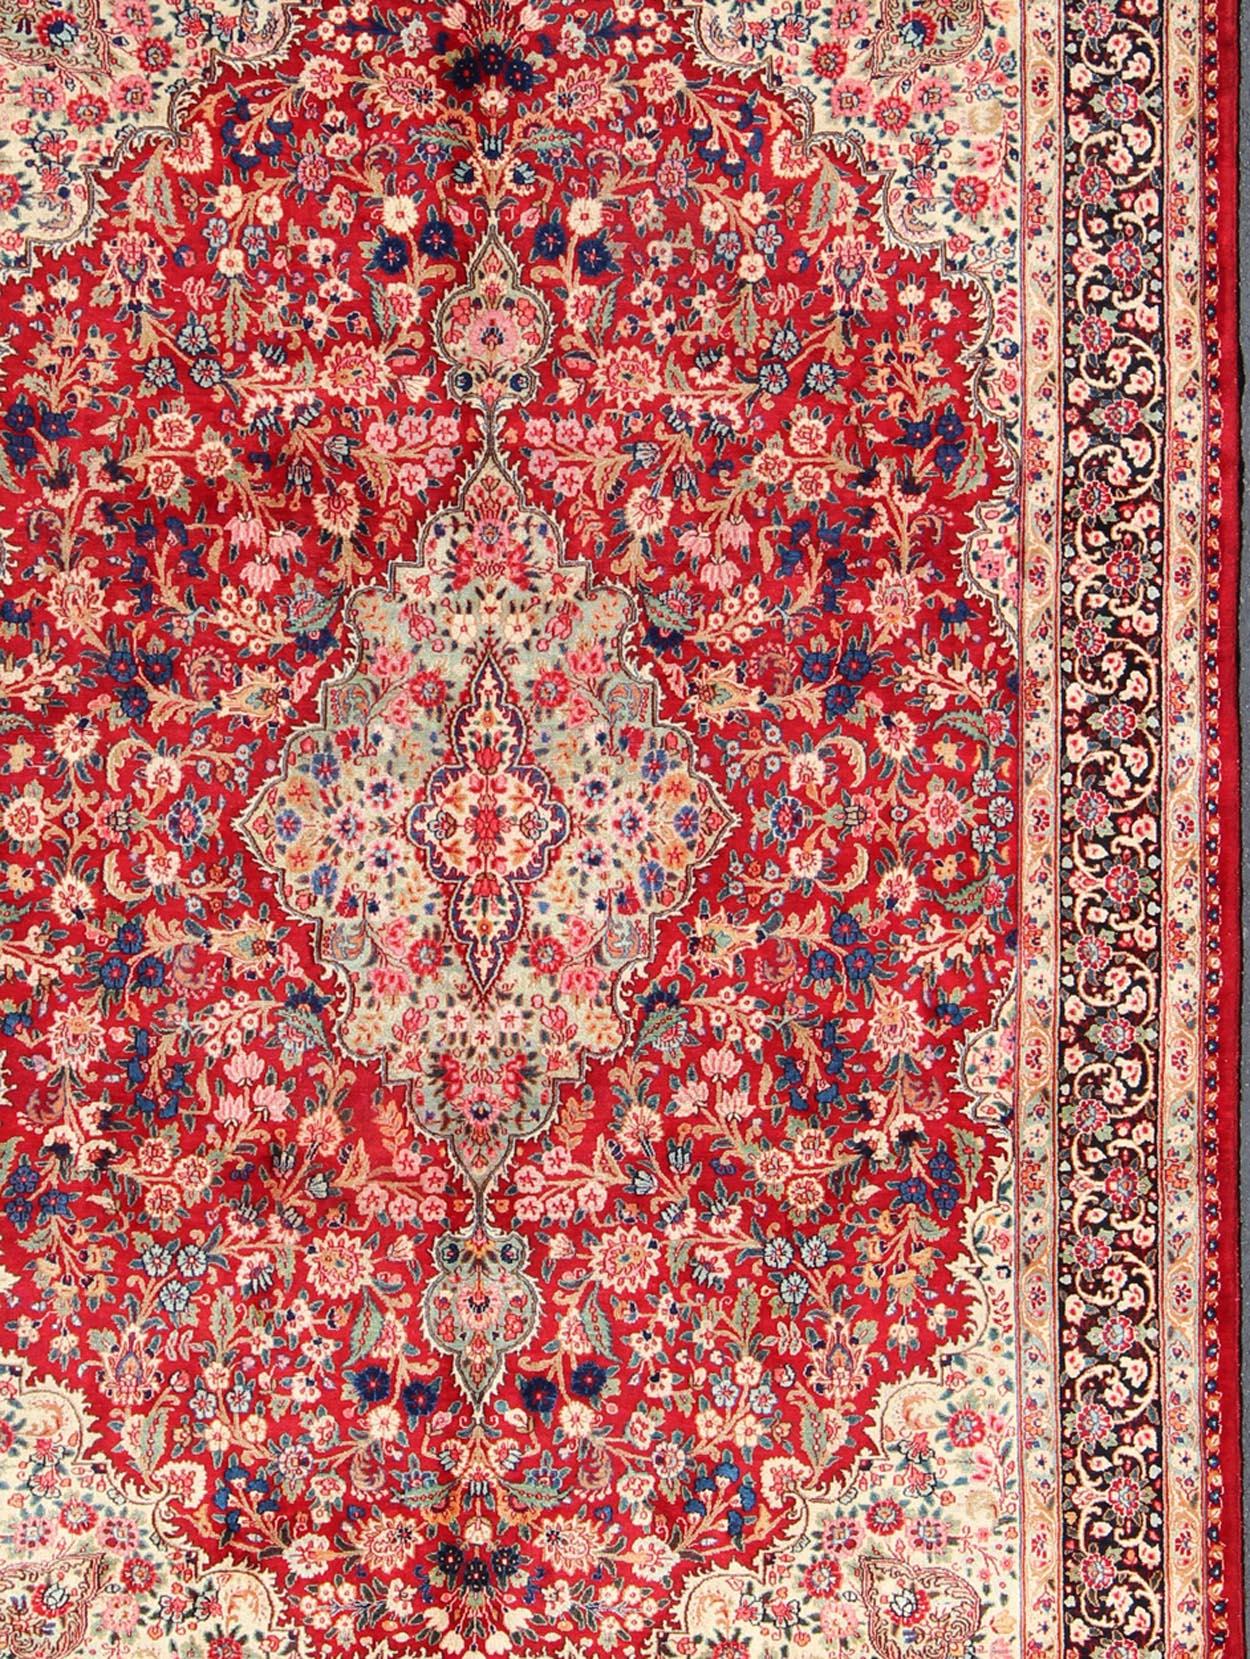 Vintage Persian Mashad rug with ornate floral medallion design in red, cream, and onyx, rug h-401-9, country of origin / type: Iran / Mashad, circa 1950

This highly decorative and elaborate vintage Persian Mashad carpet features a multi-tiered